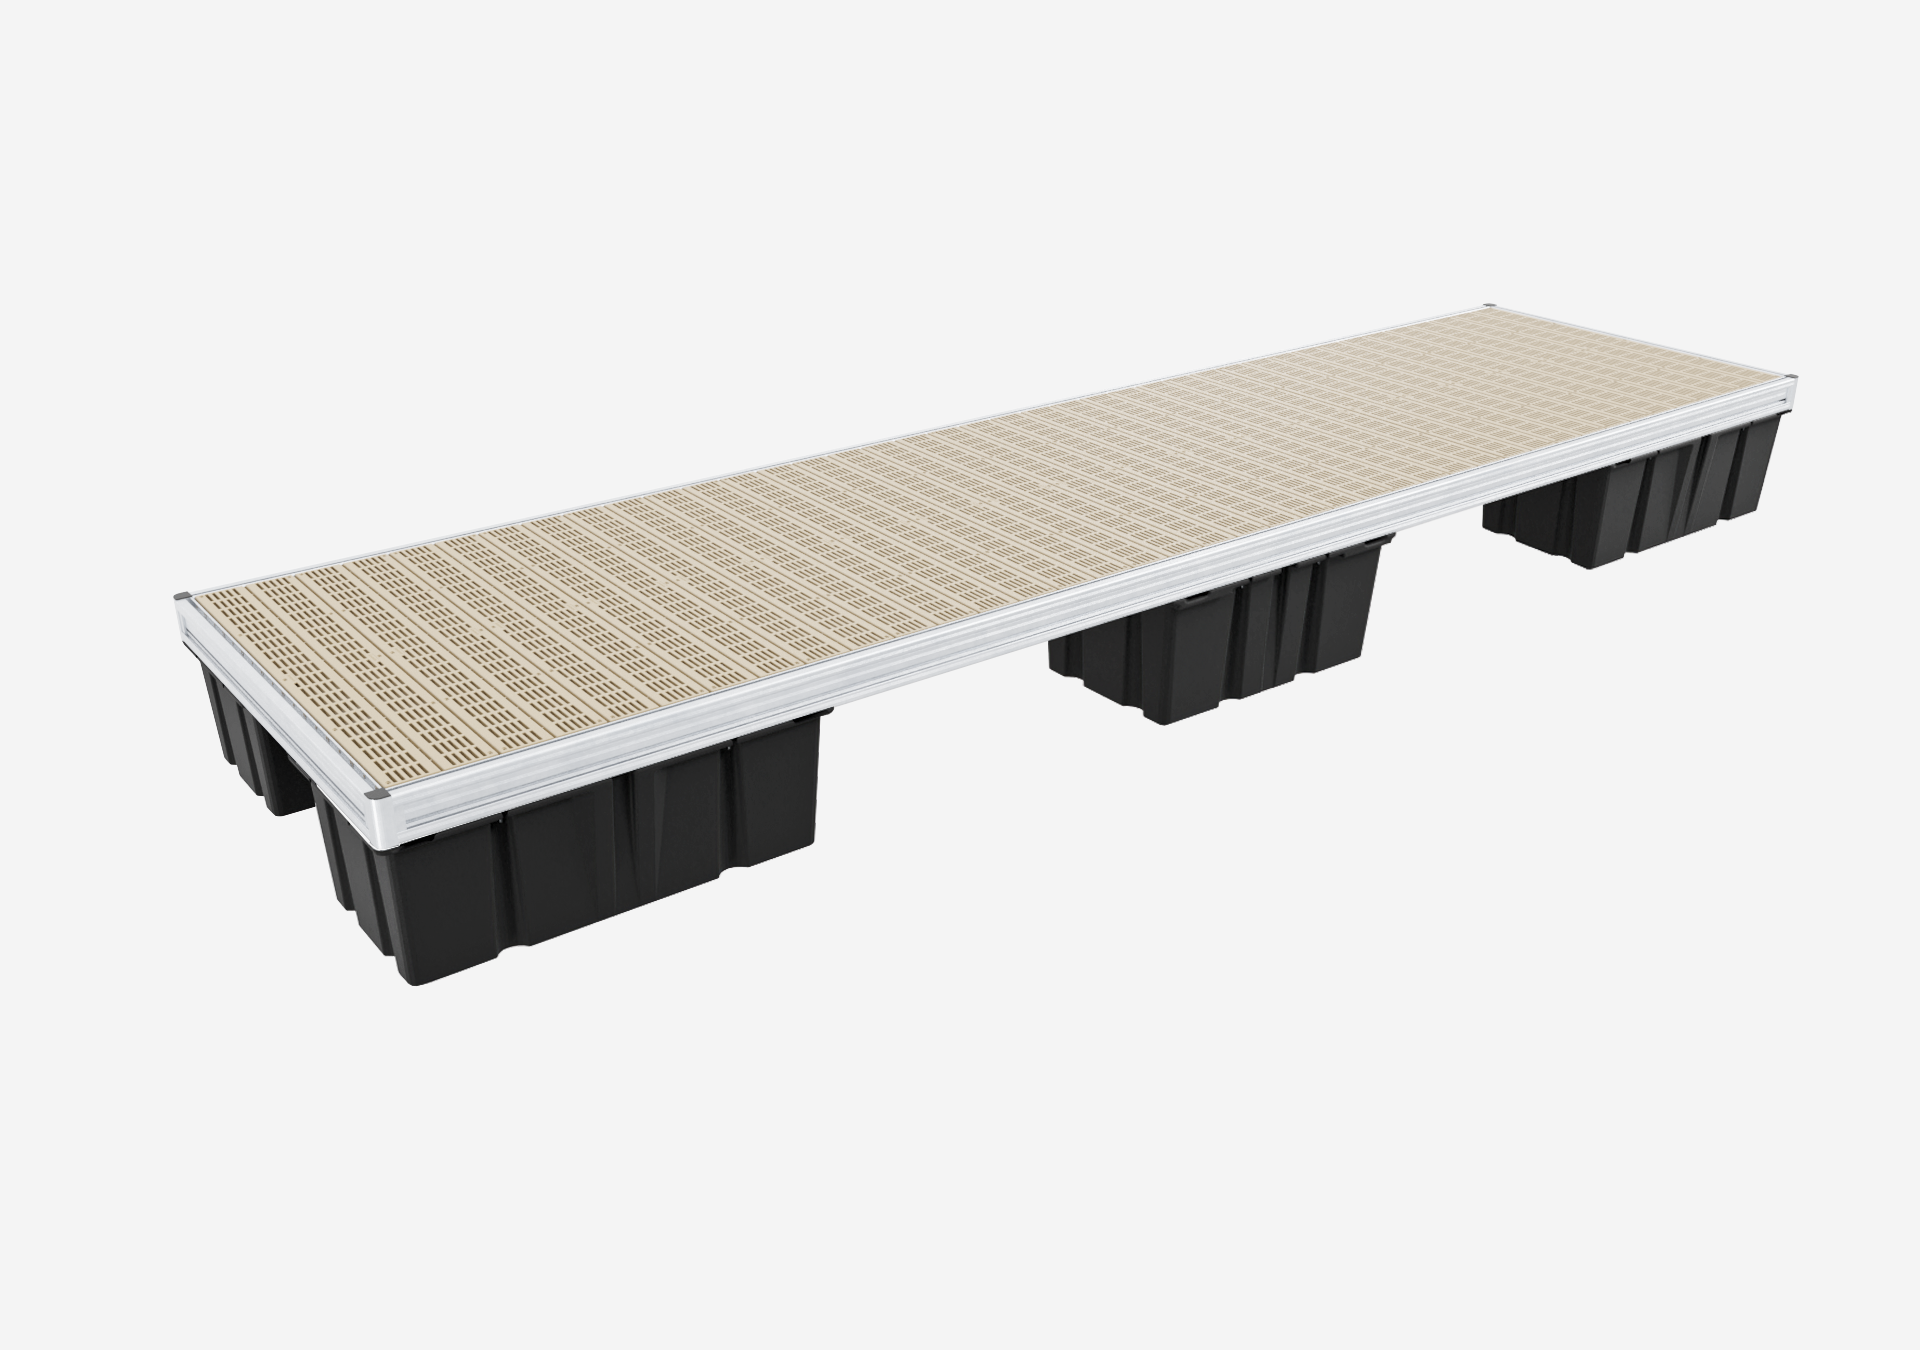 5' x 20' Dock with plastic surface 2023 model